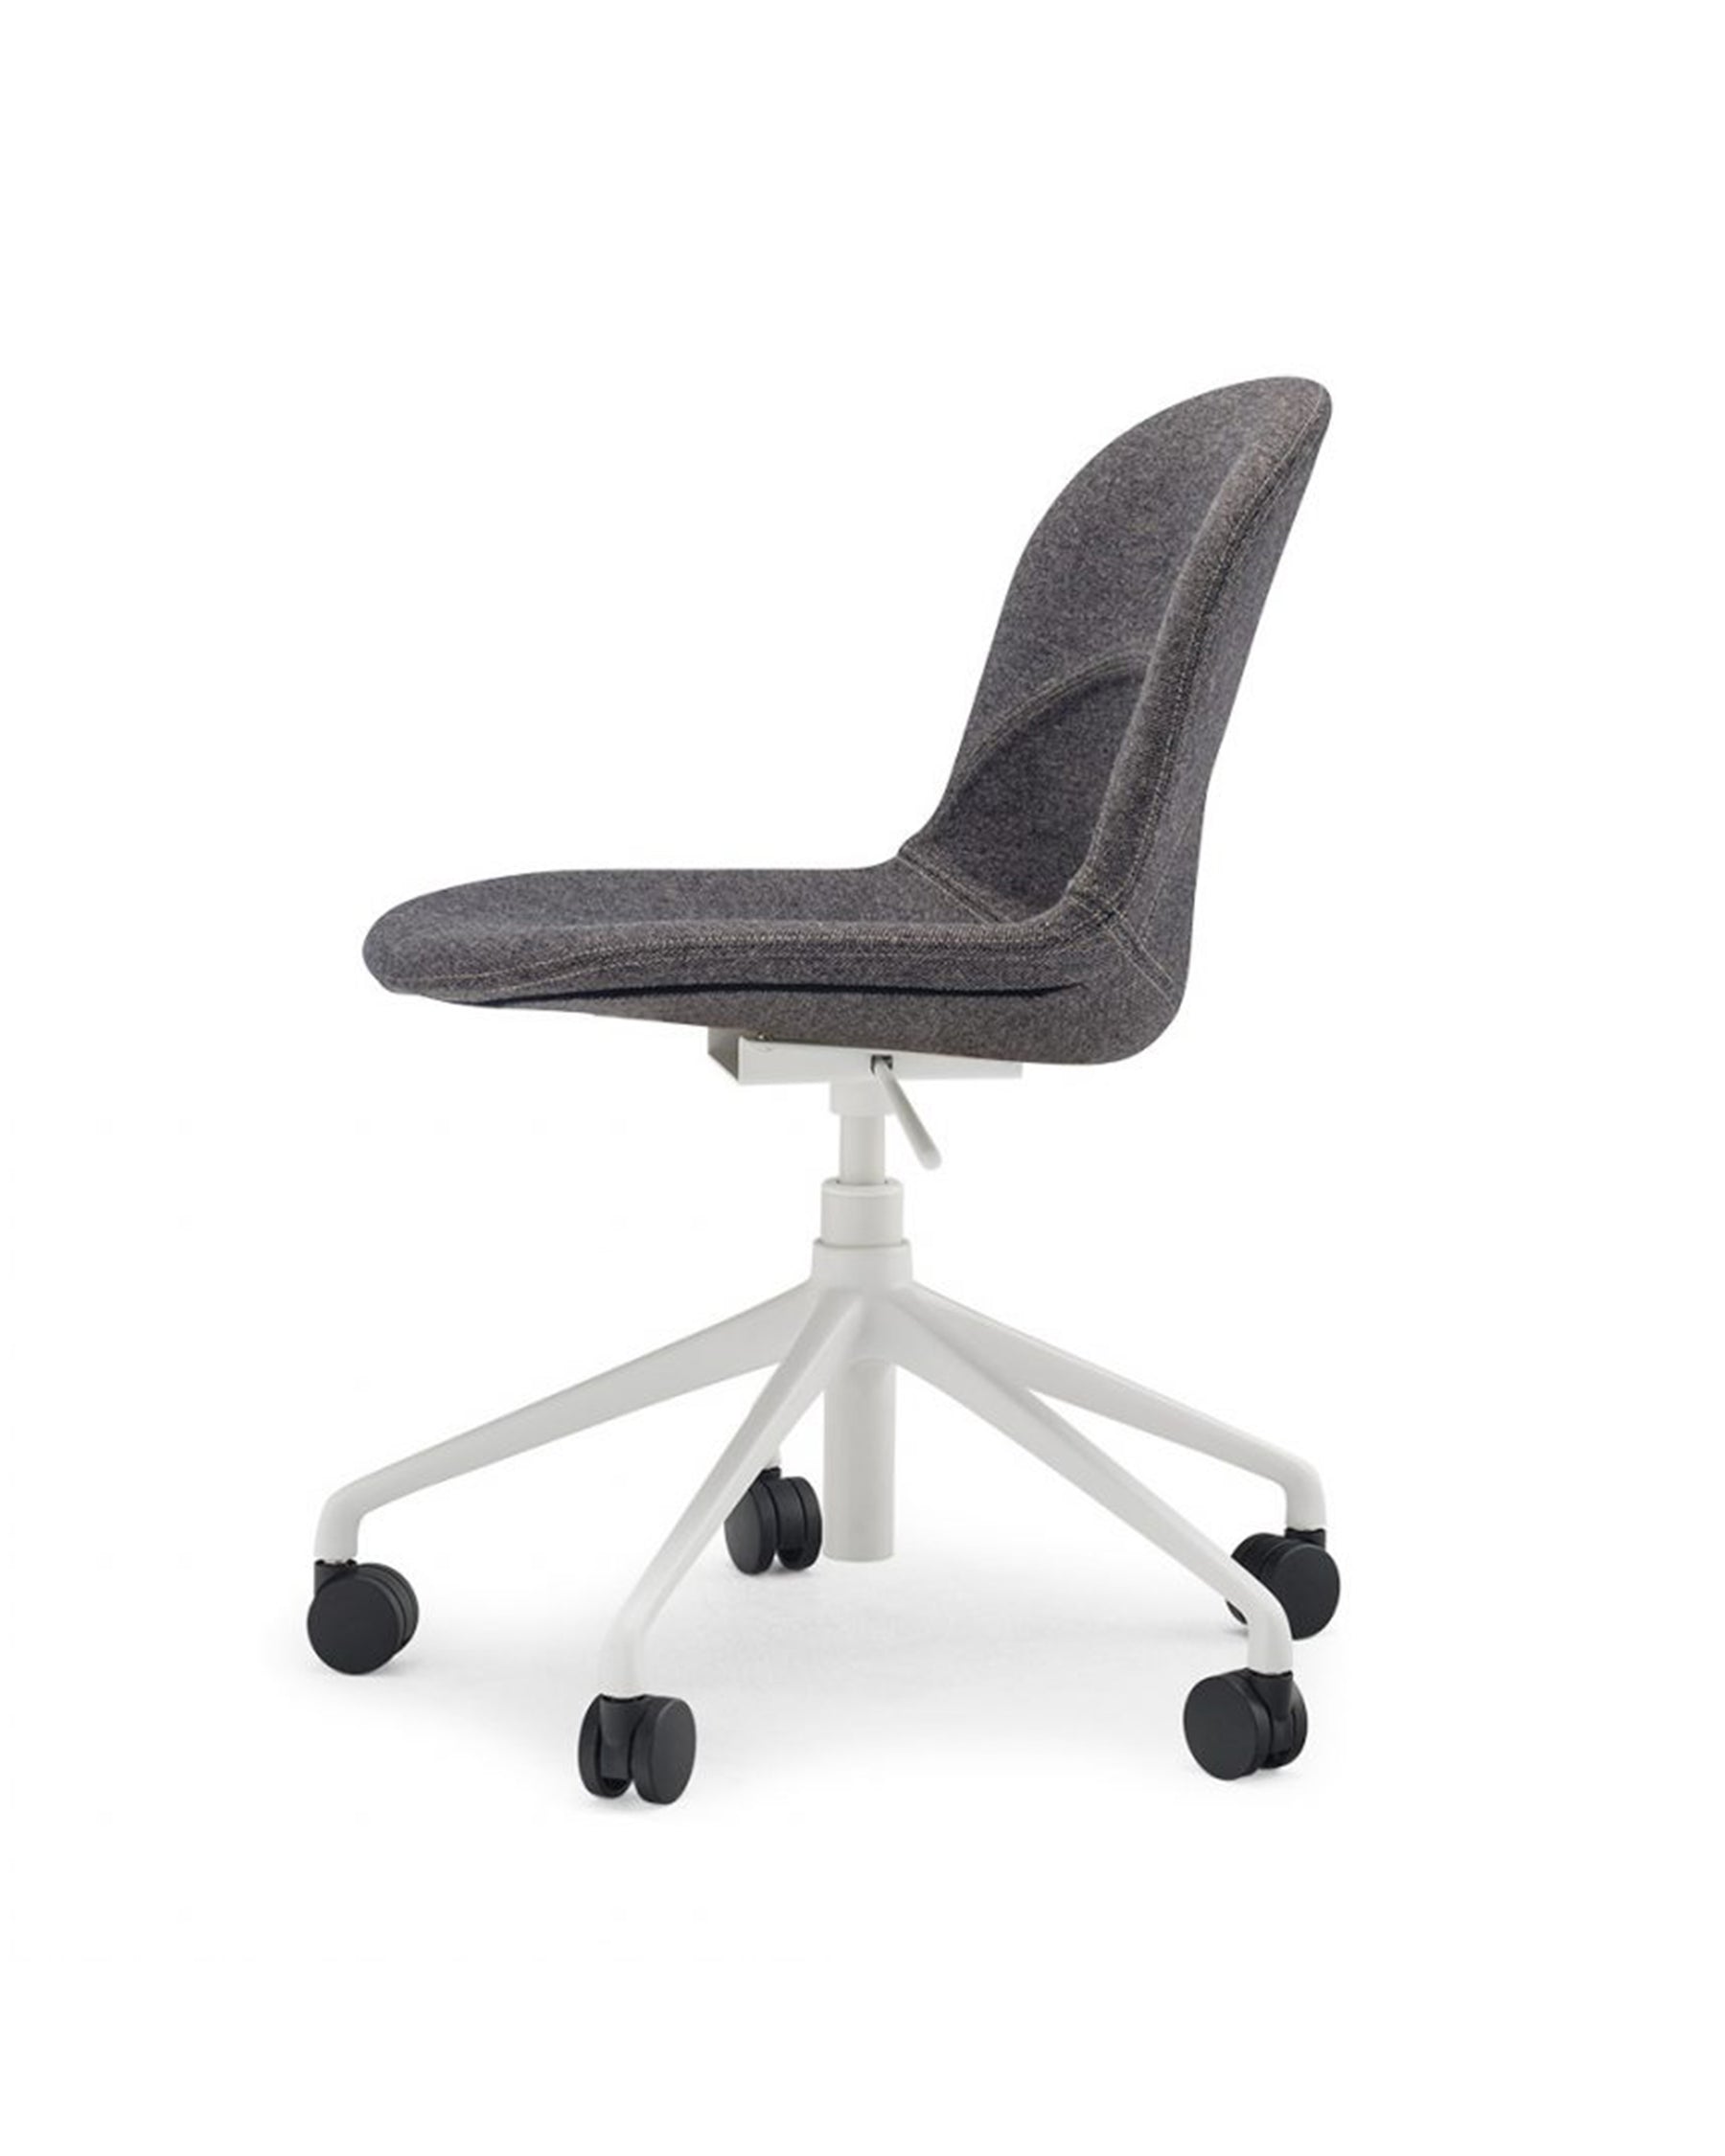 Lunar is a flexible and versatile seating solution designed for the comfort of sitting at a desk.   With a clean, relaxed aesthetic, the chair features soft curvaceous lines produced through injected 3D foam technology. This unique production method allows for greater contouring of form, resulting in a flowing organic shape with superior comfort and individuality in design.